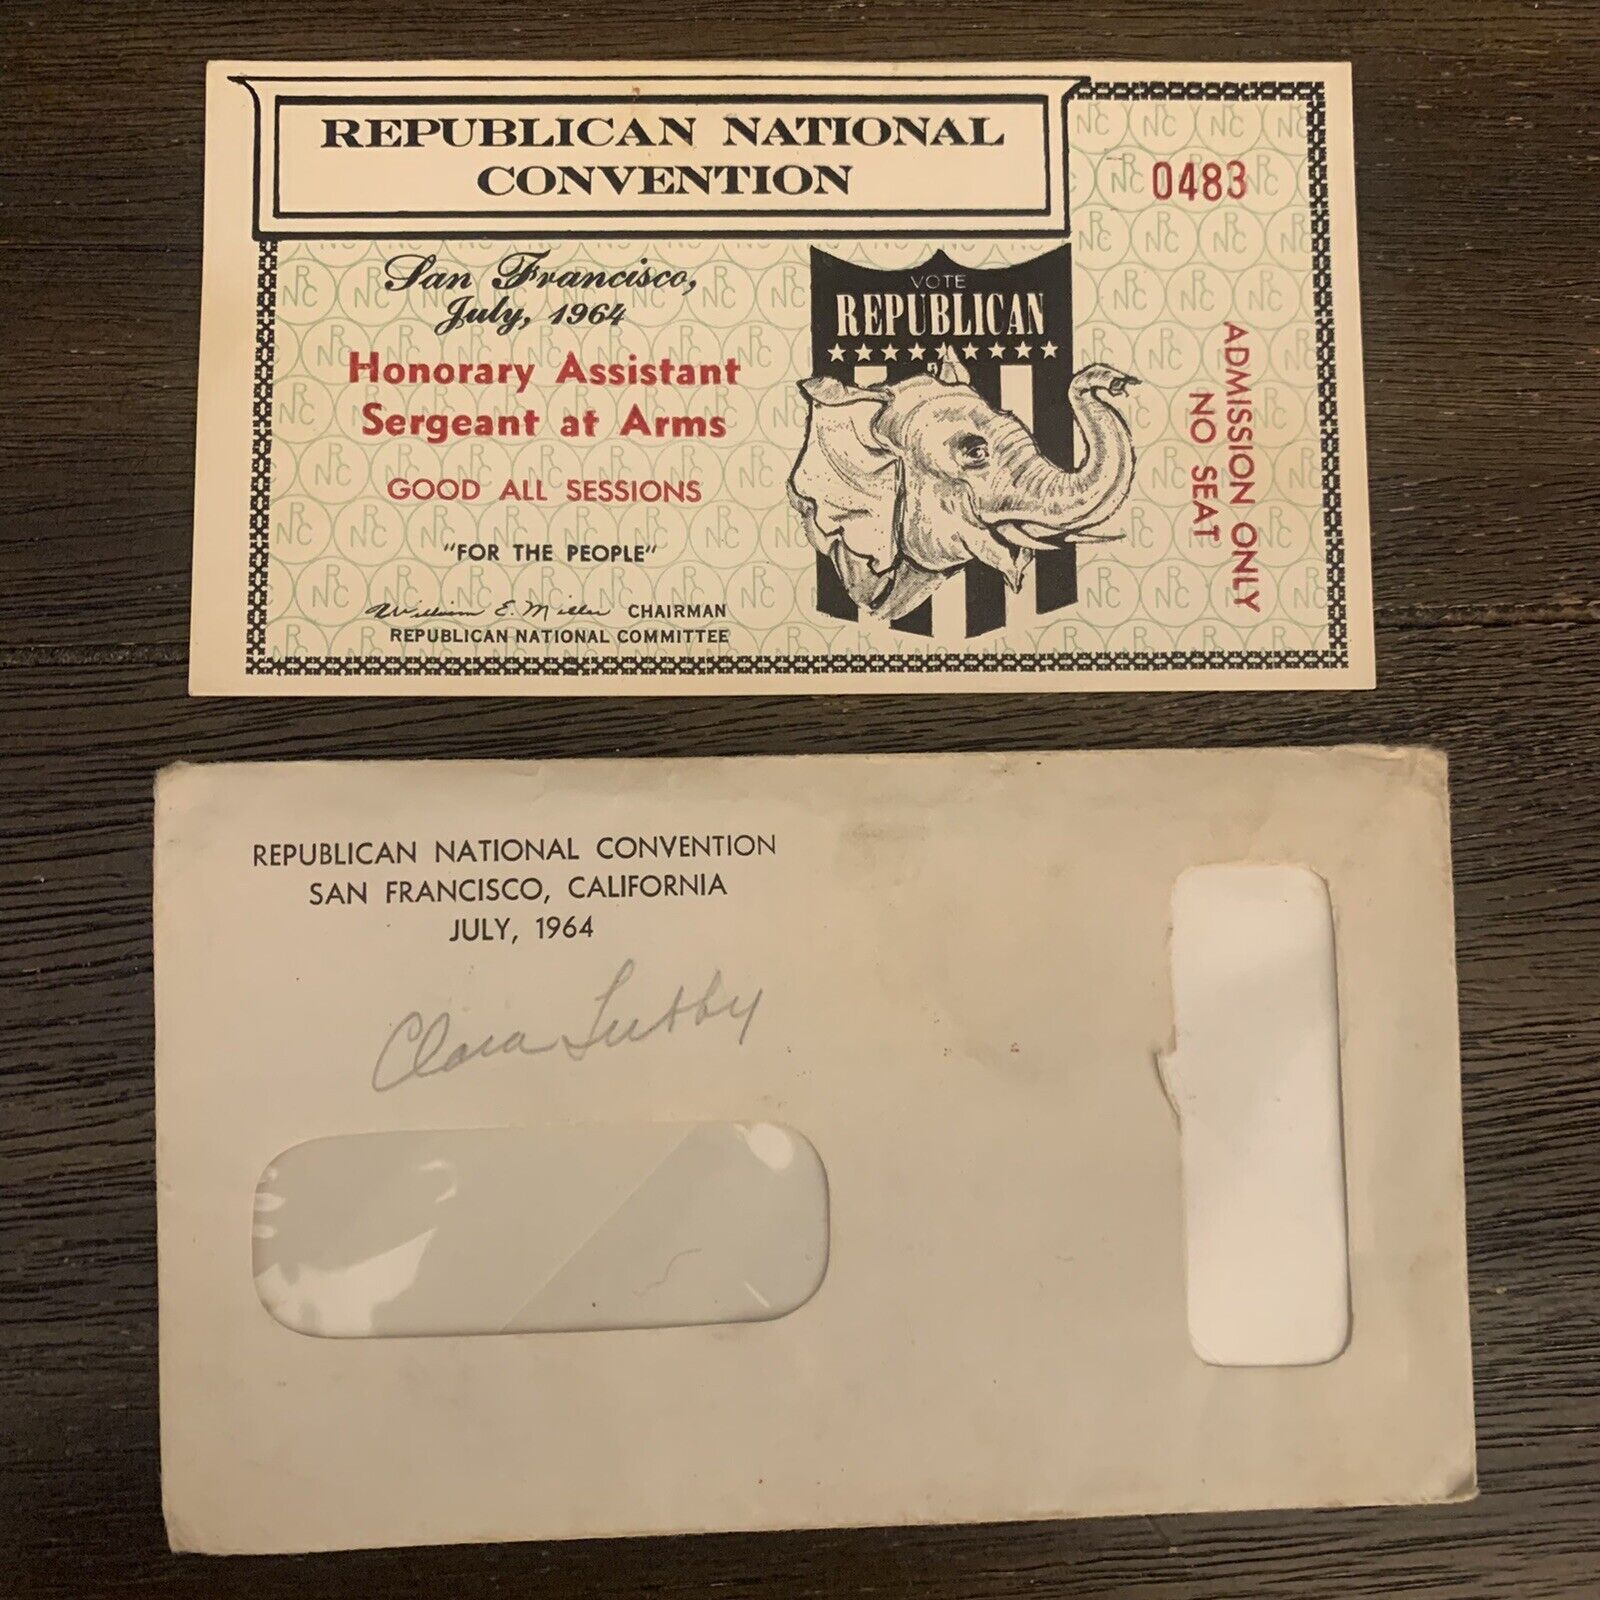 Rare 1964 Republican National Convention All Sessions Asst Sergeant Arms Ticket